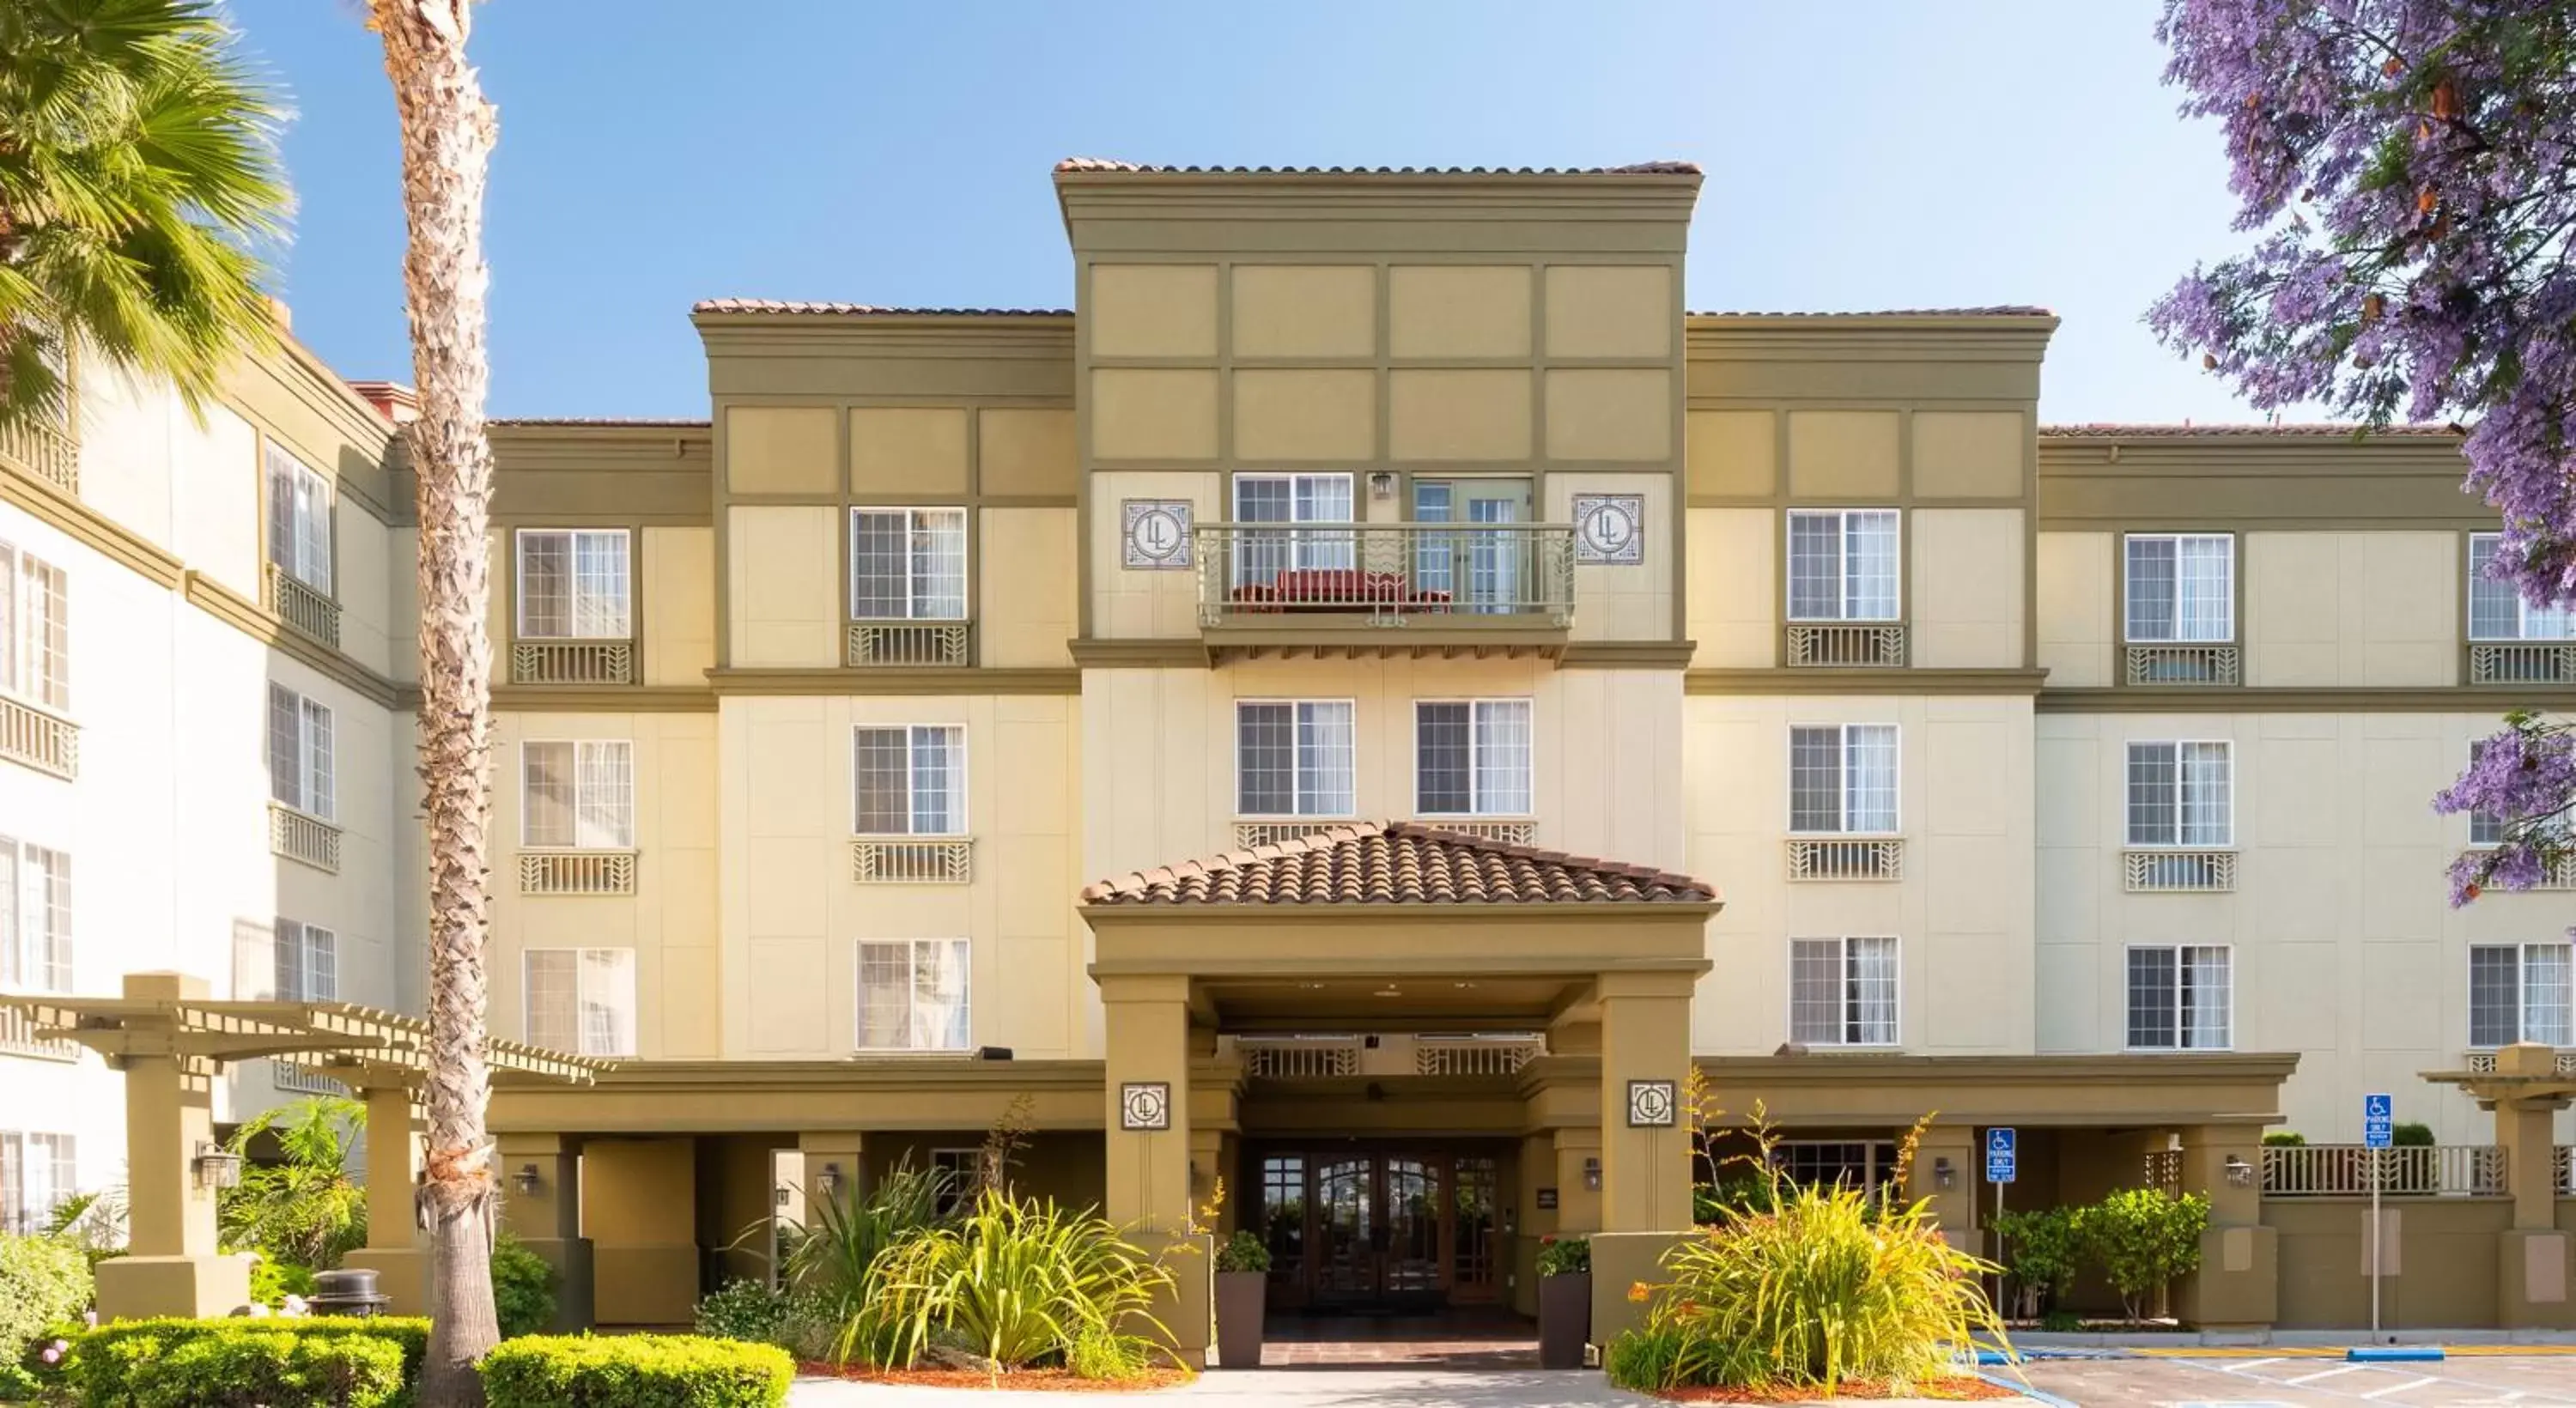 Property Building in Larkspur Landing Sunnyvale-An All-Suite Hotel